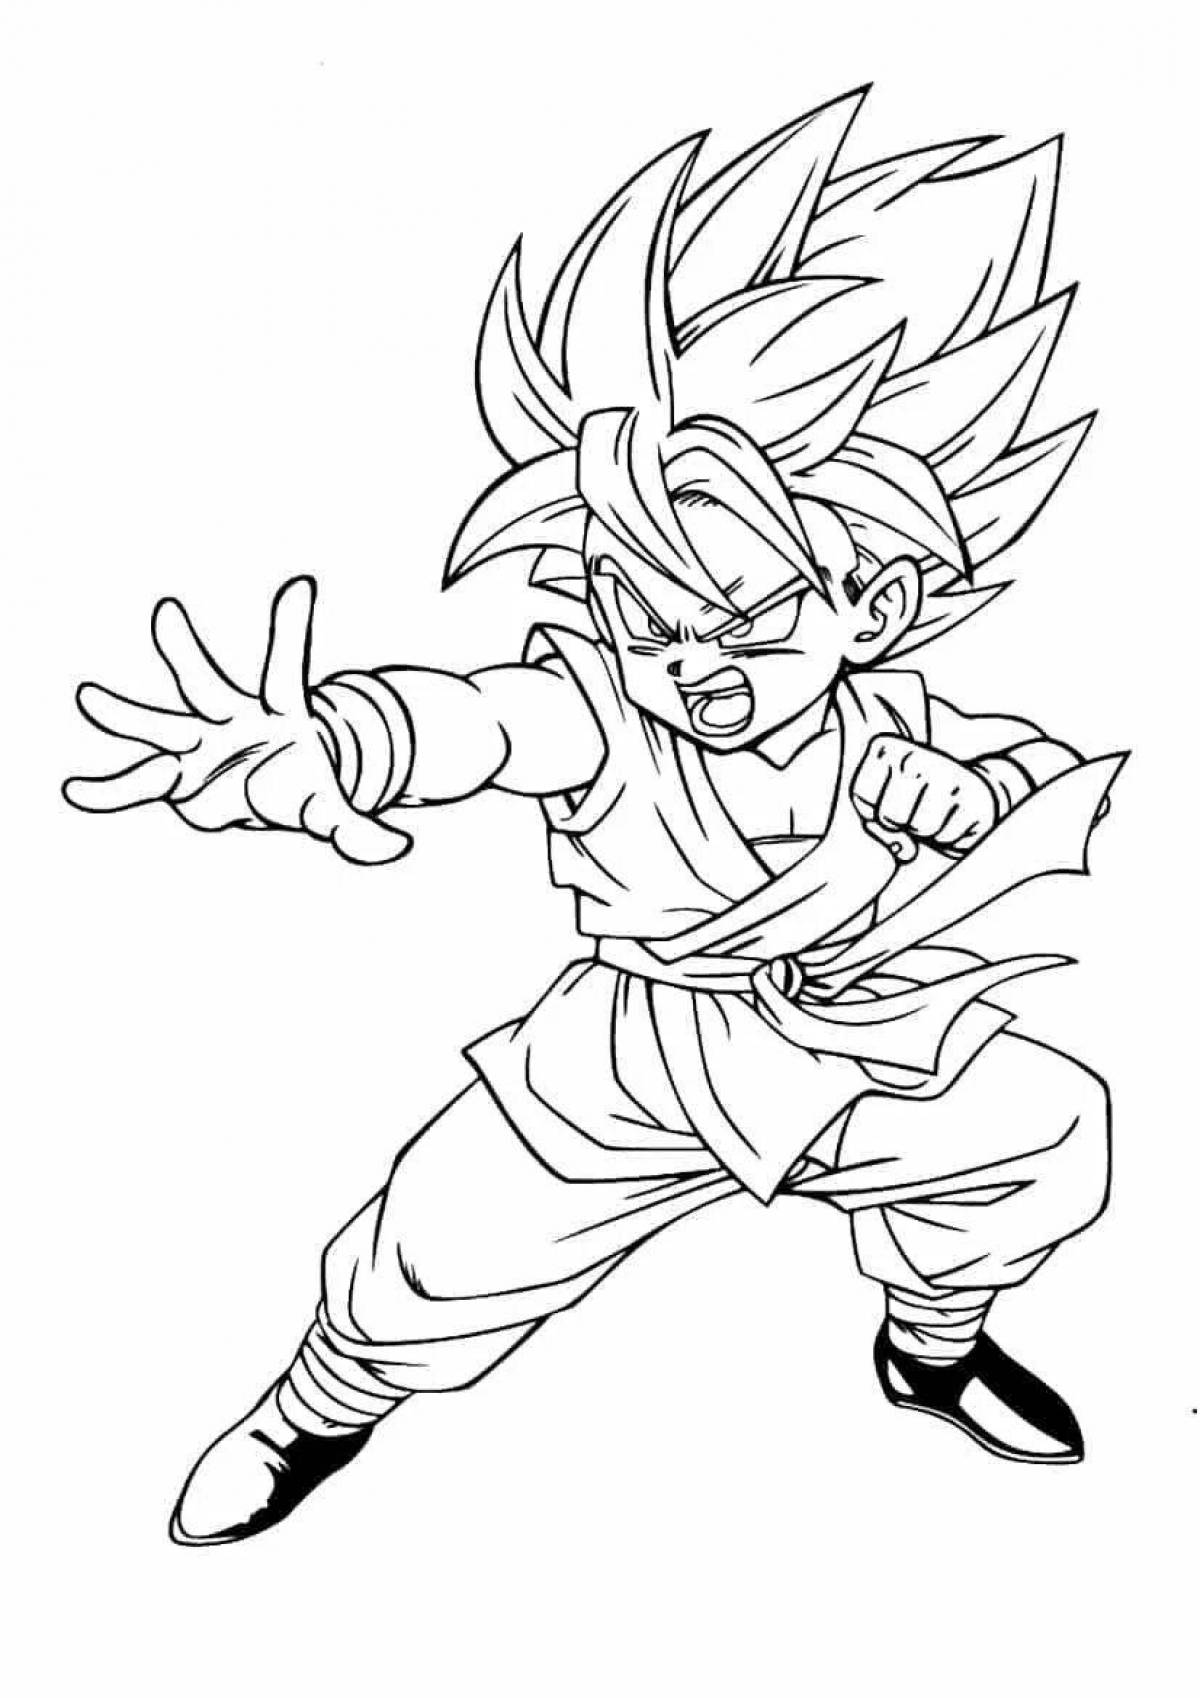 Dragon Ball awesome coloring page